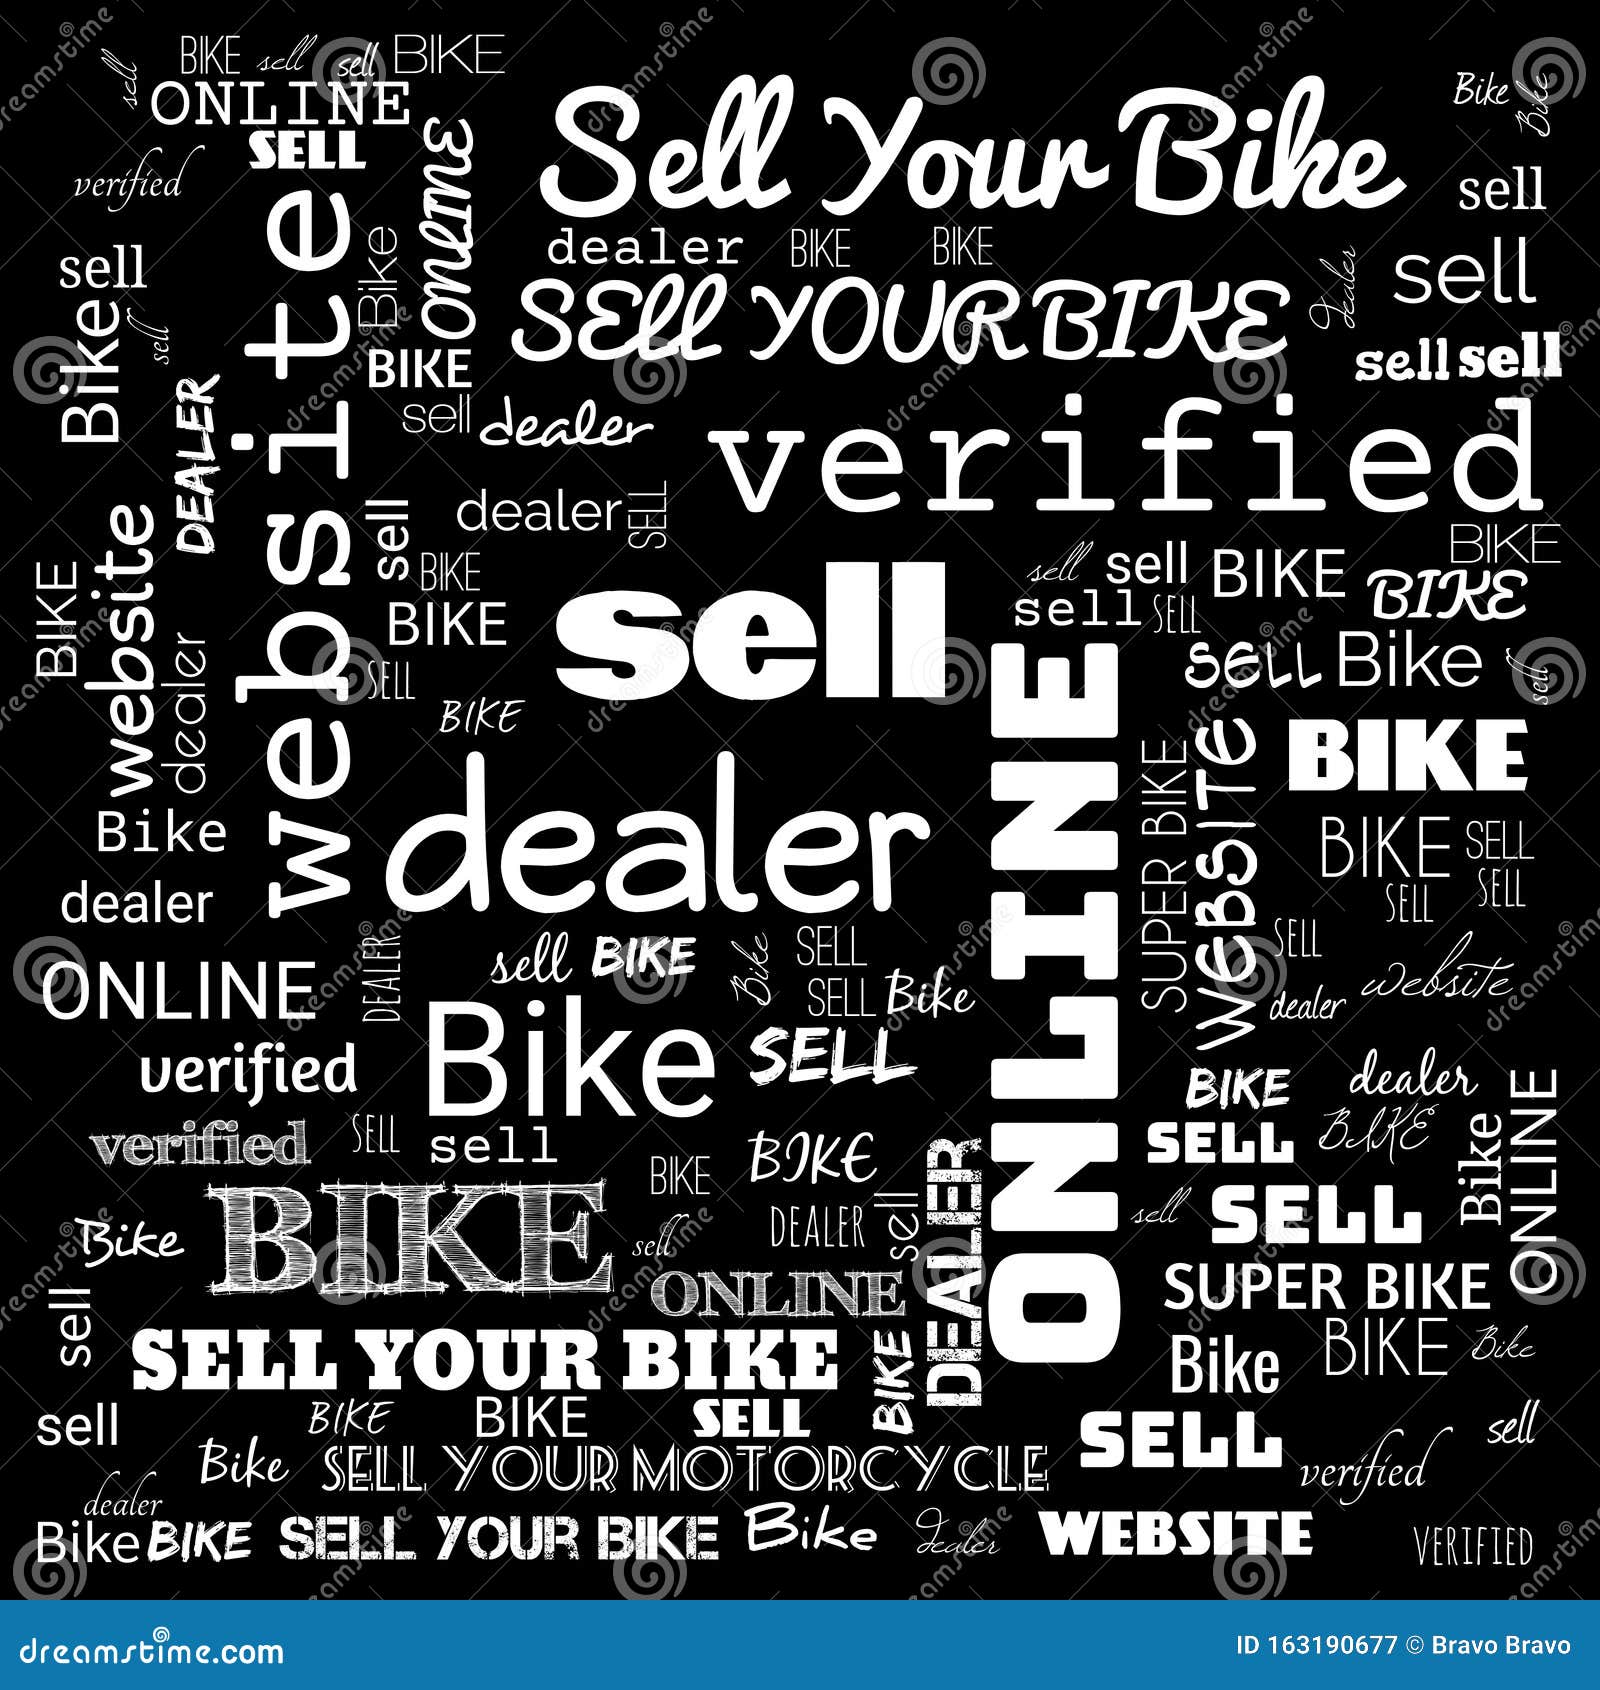 Sell Bike Word Cloud Use for Banner, Painting, Motivation, Web-page, Website Background, T-shirt and Shirt Printing, Poster, Stock Illustration